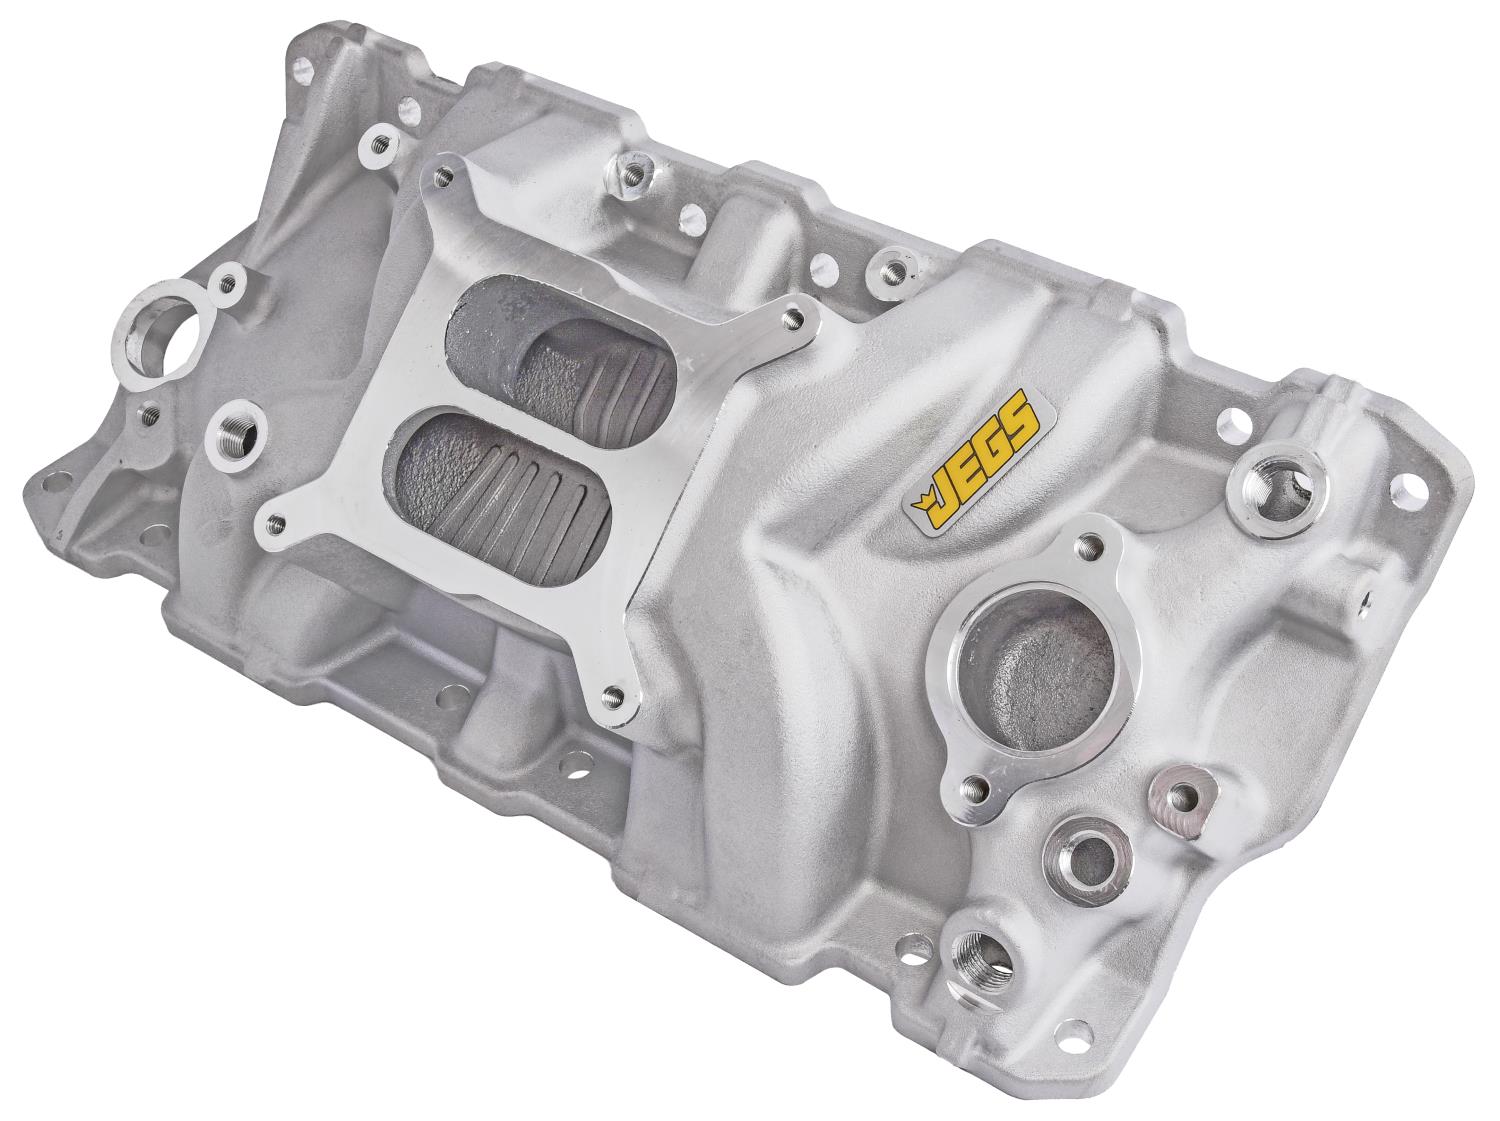 Intake Manifold for 1955-1986 Small Block Chevy 262-400, Dual Plane [Satin]